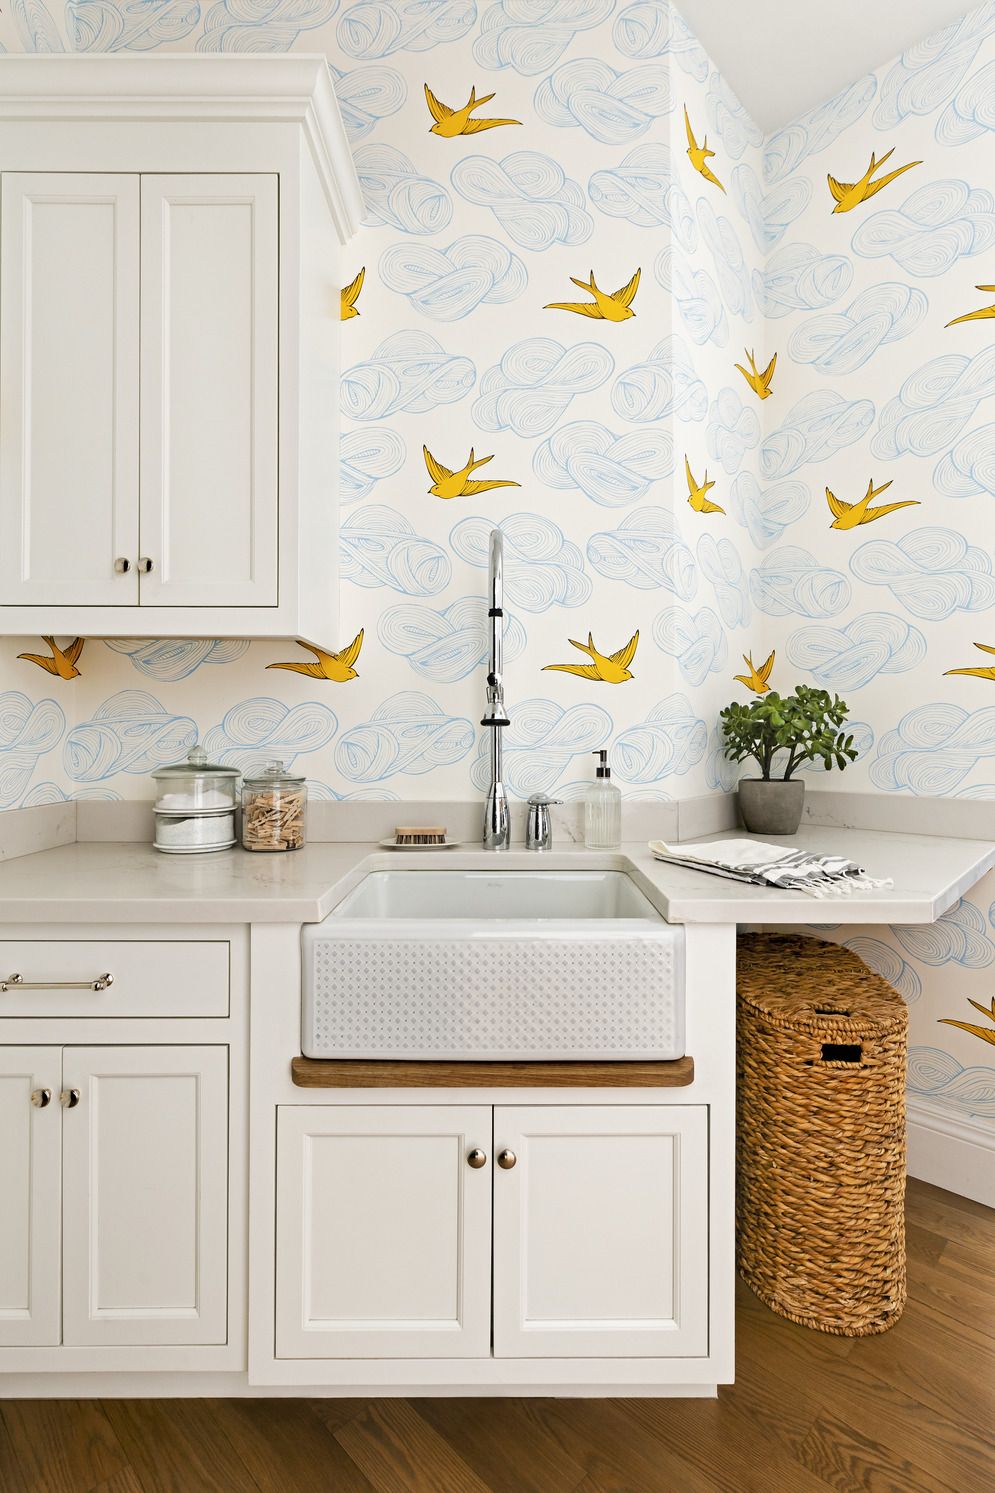 10 Laundry Room Decor Ideas For Style and Function